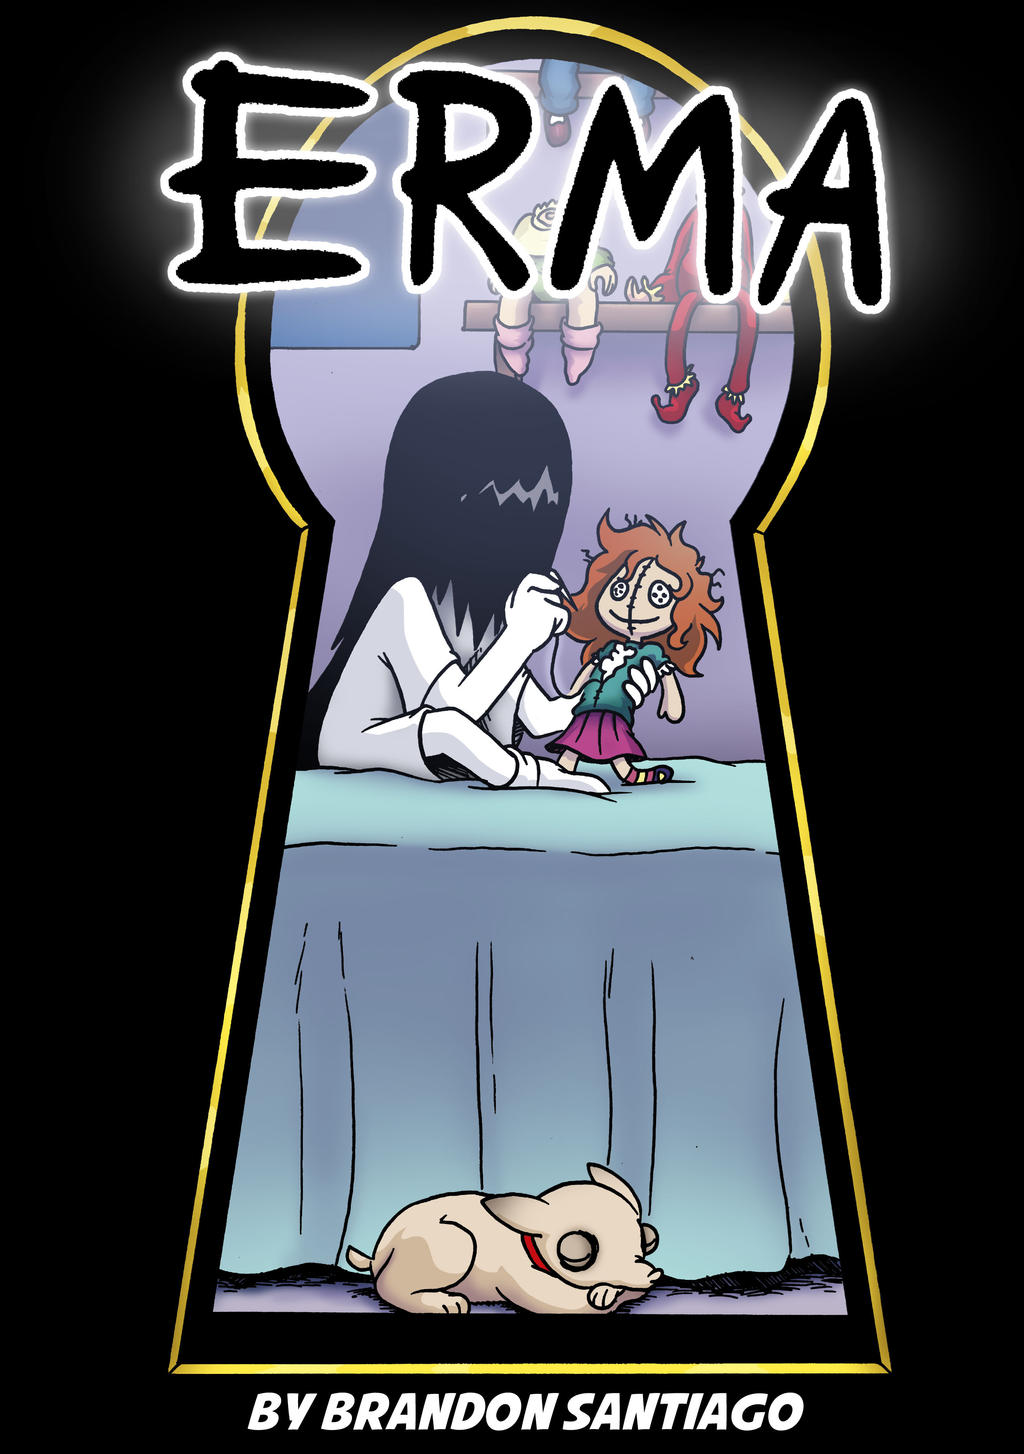 ERMA ISSUE 2 IS OUT NOW!